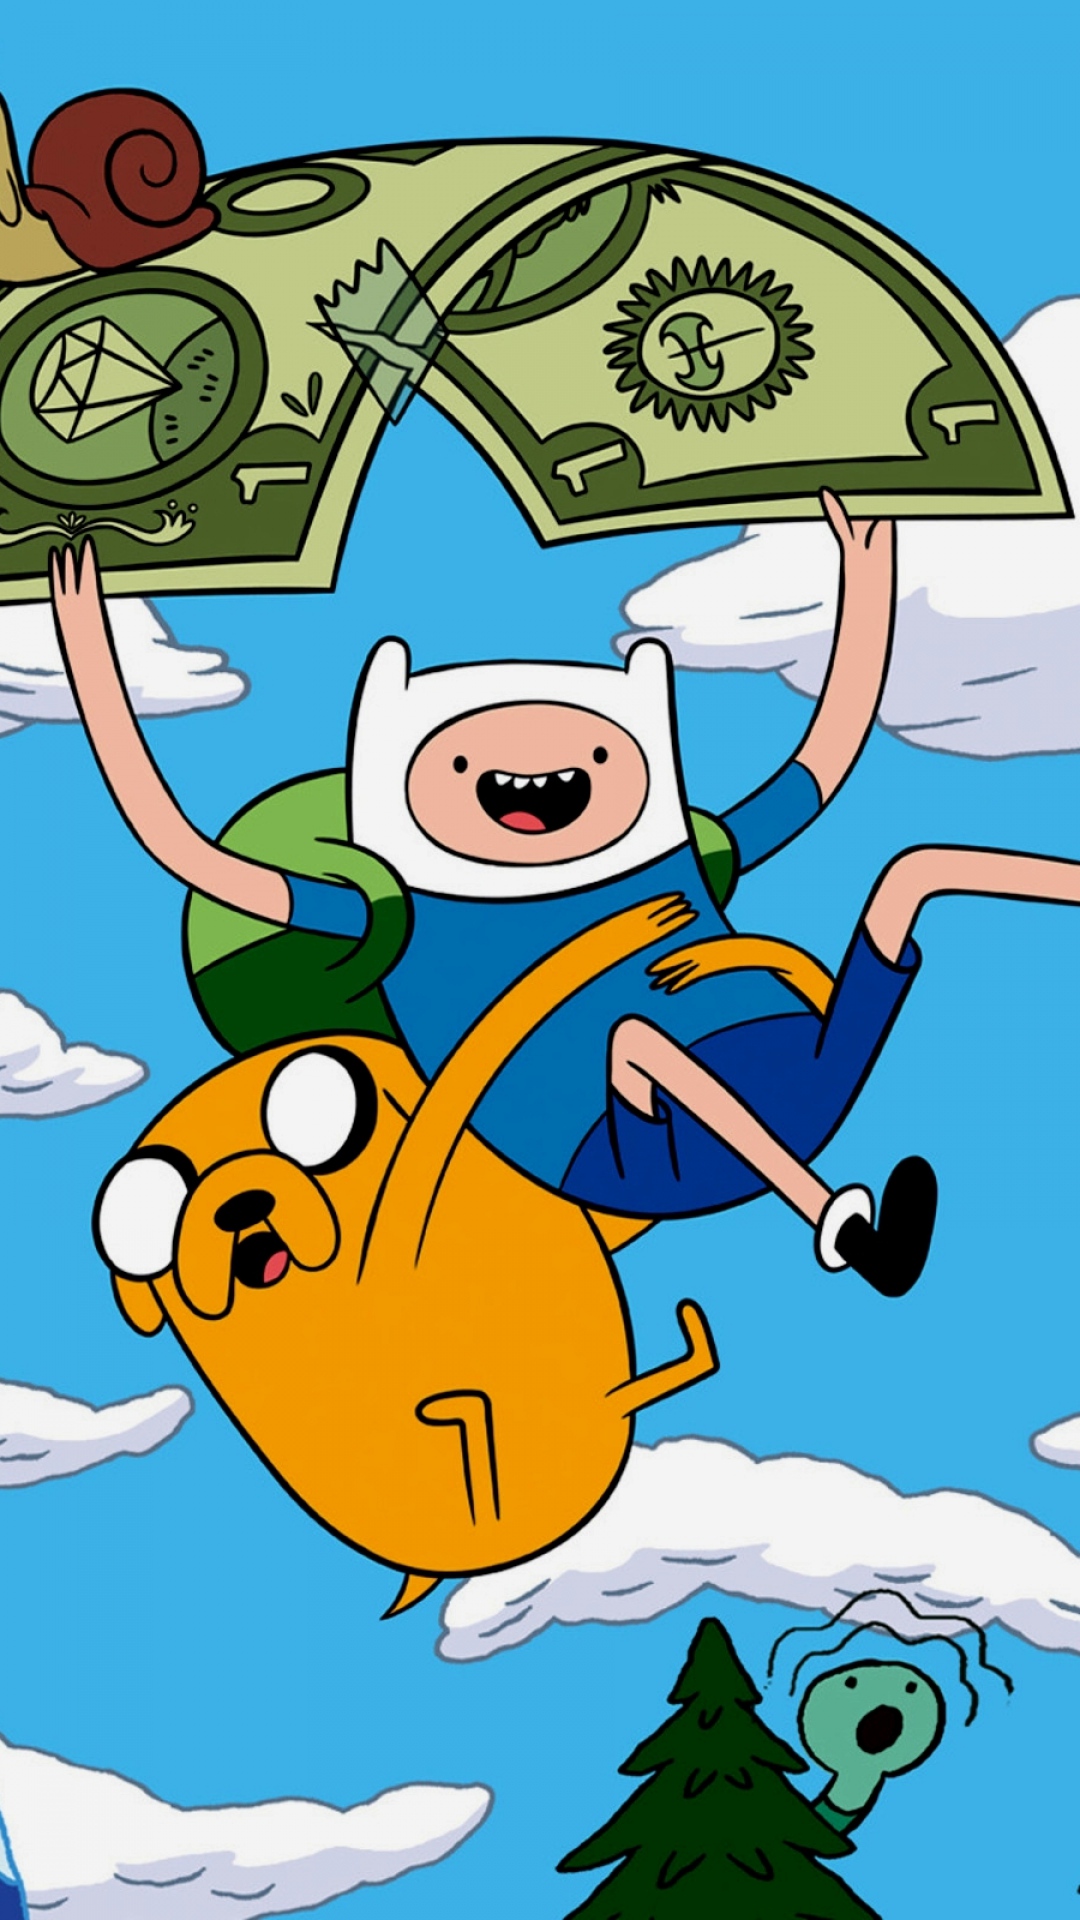 Free Download Adventure Time Iphone Wallpapers Hd 1080x19 For Your Desktop Mobile Tablet Explore 78 Adventure Time Wallpaper Iphone Adventure Wallpapers Adventure Time Hd Wallpaper Adventure Time Iphone Wallpaper Tumblr